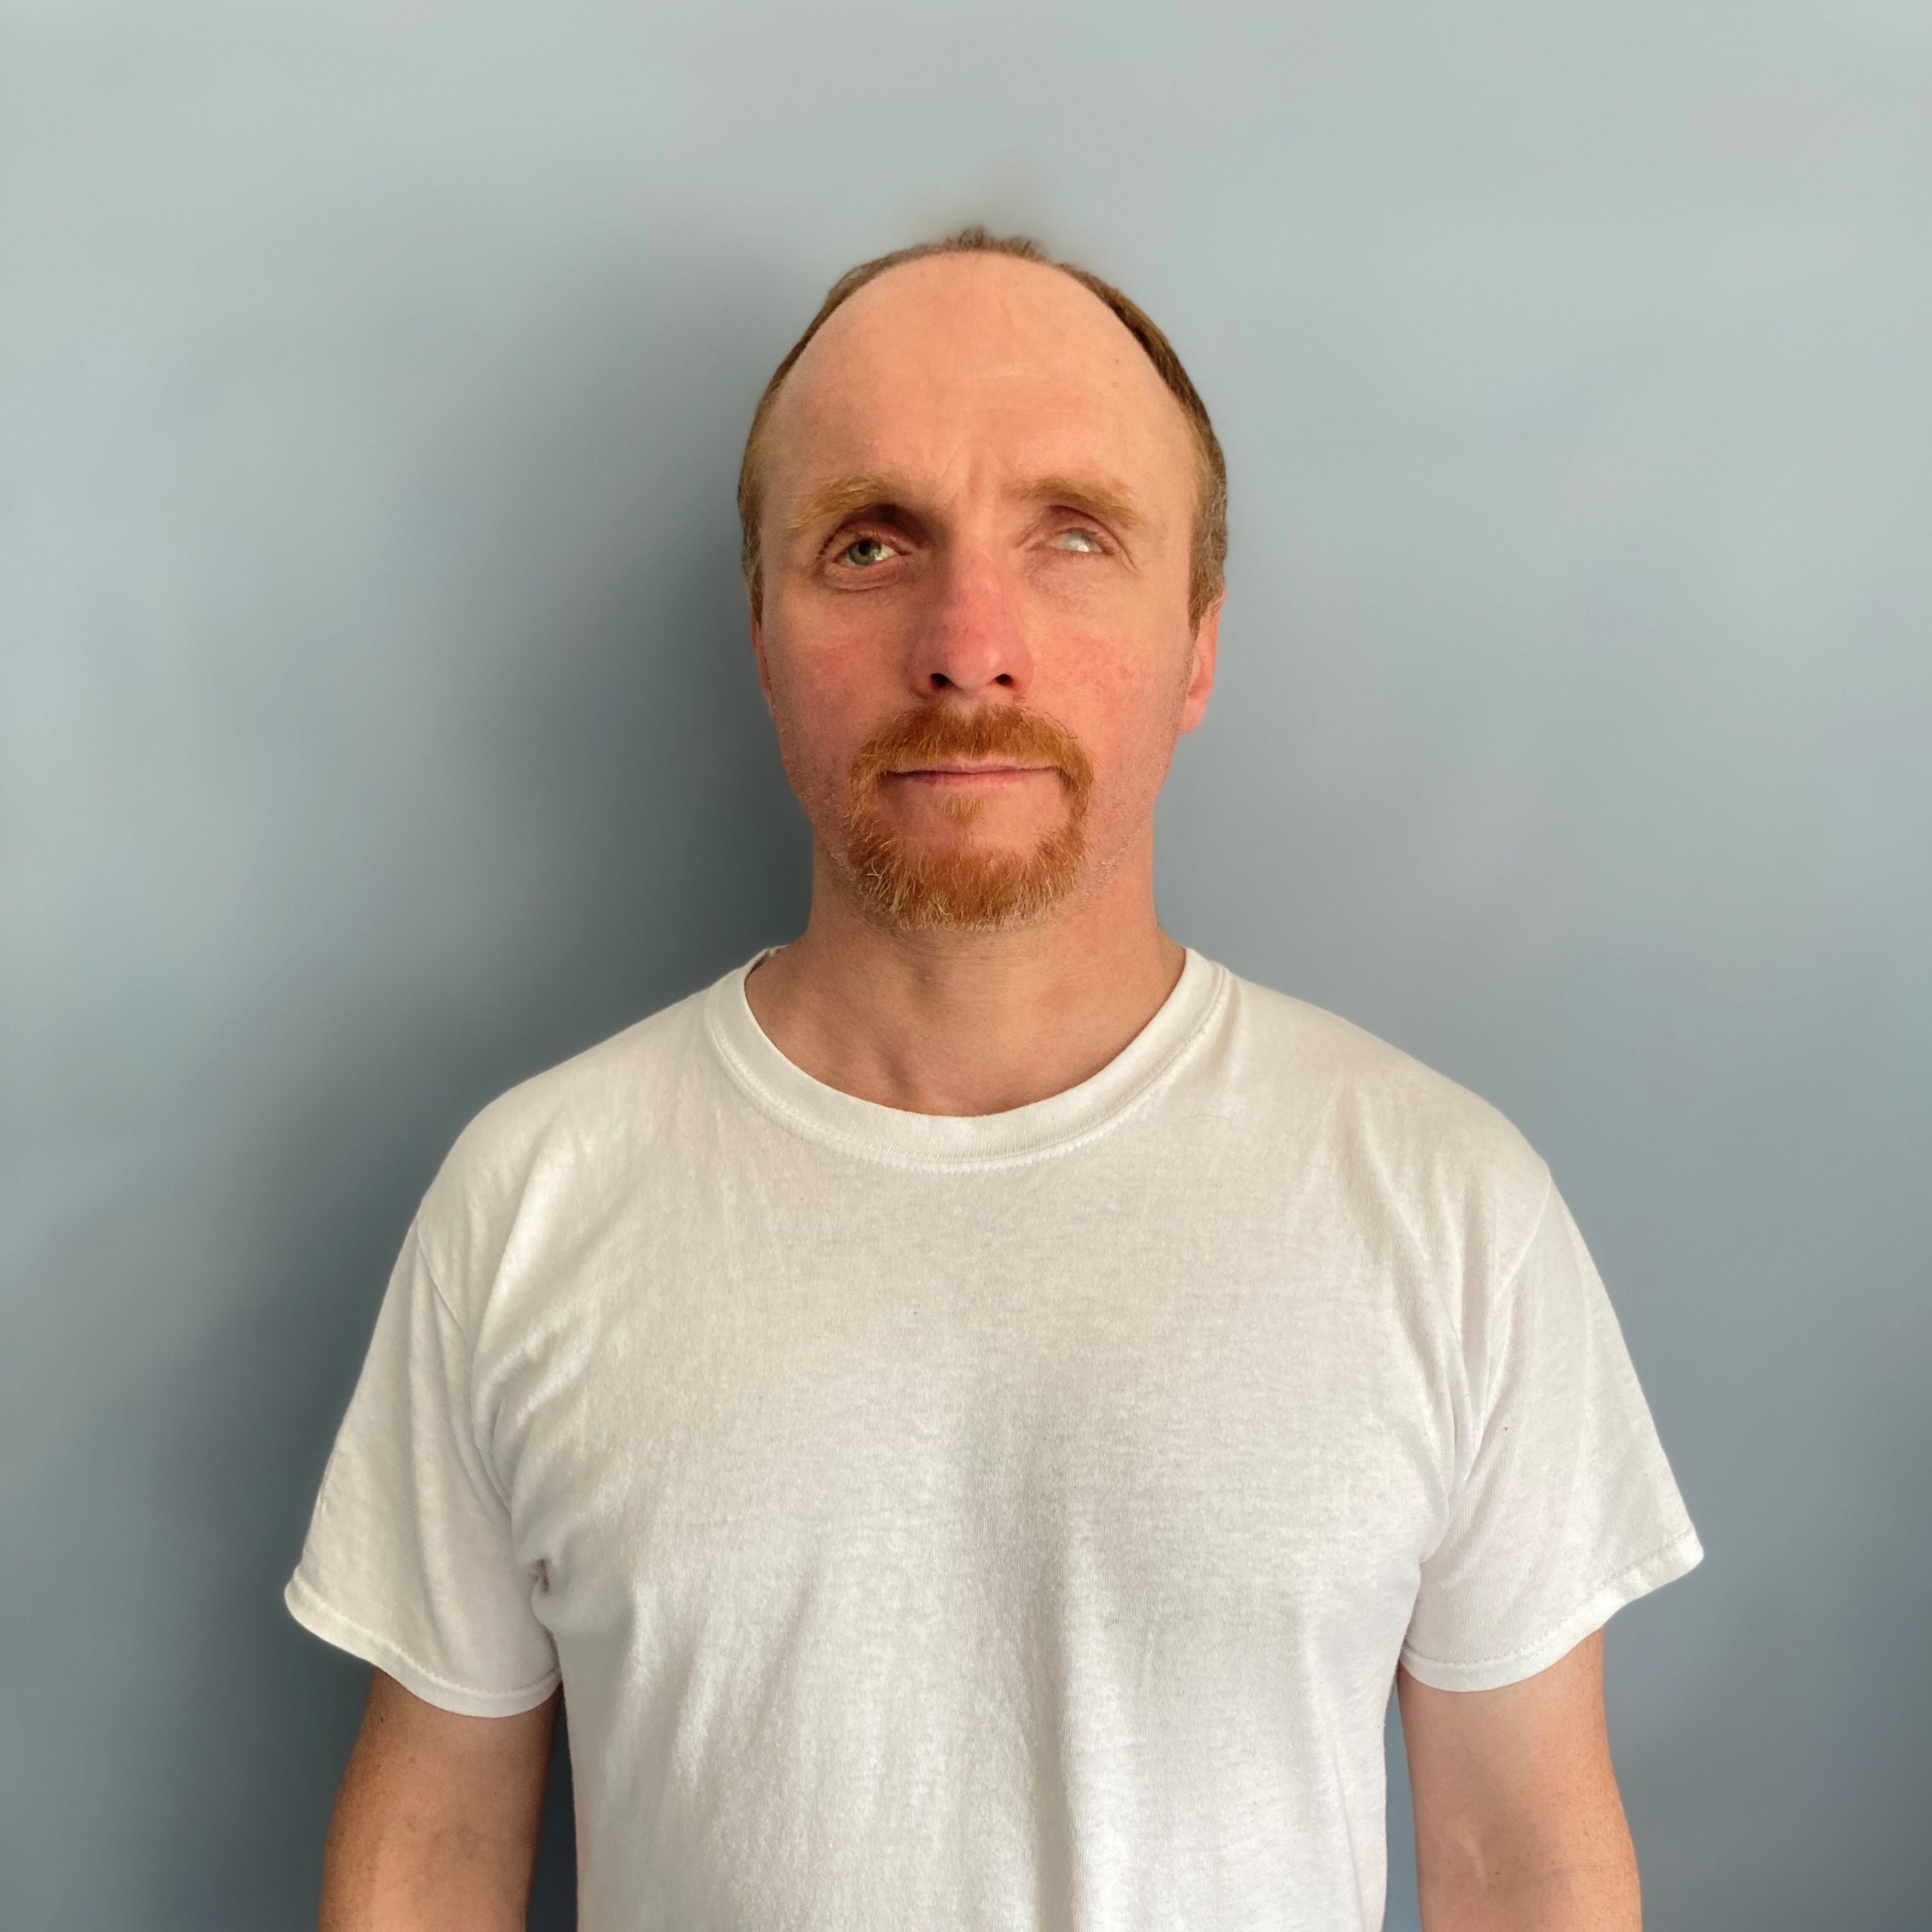 Markus Böttner, customer service, with short, reddish-brown hair, a high forehead and a reddish-brown beard, stands in a white T-shirt in front of a gray wall and looks friendly into the camera.